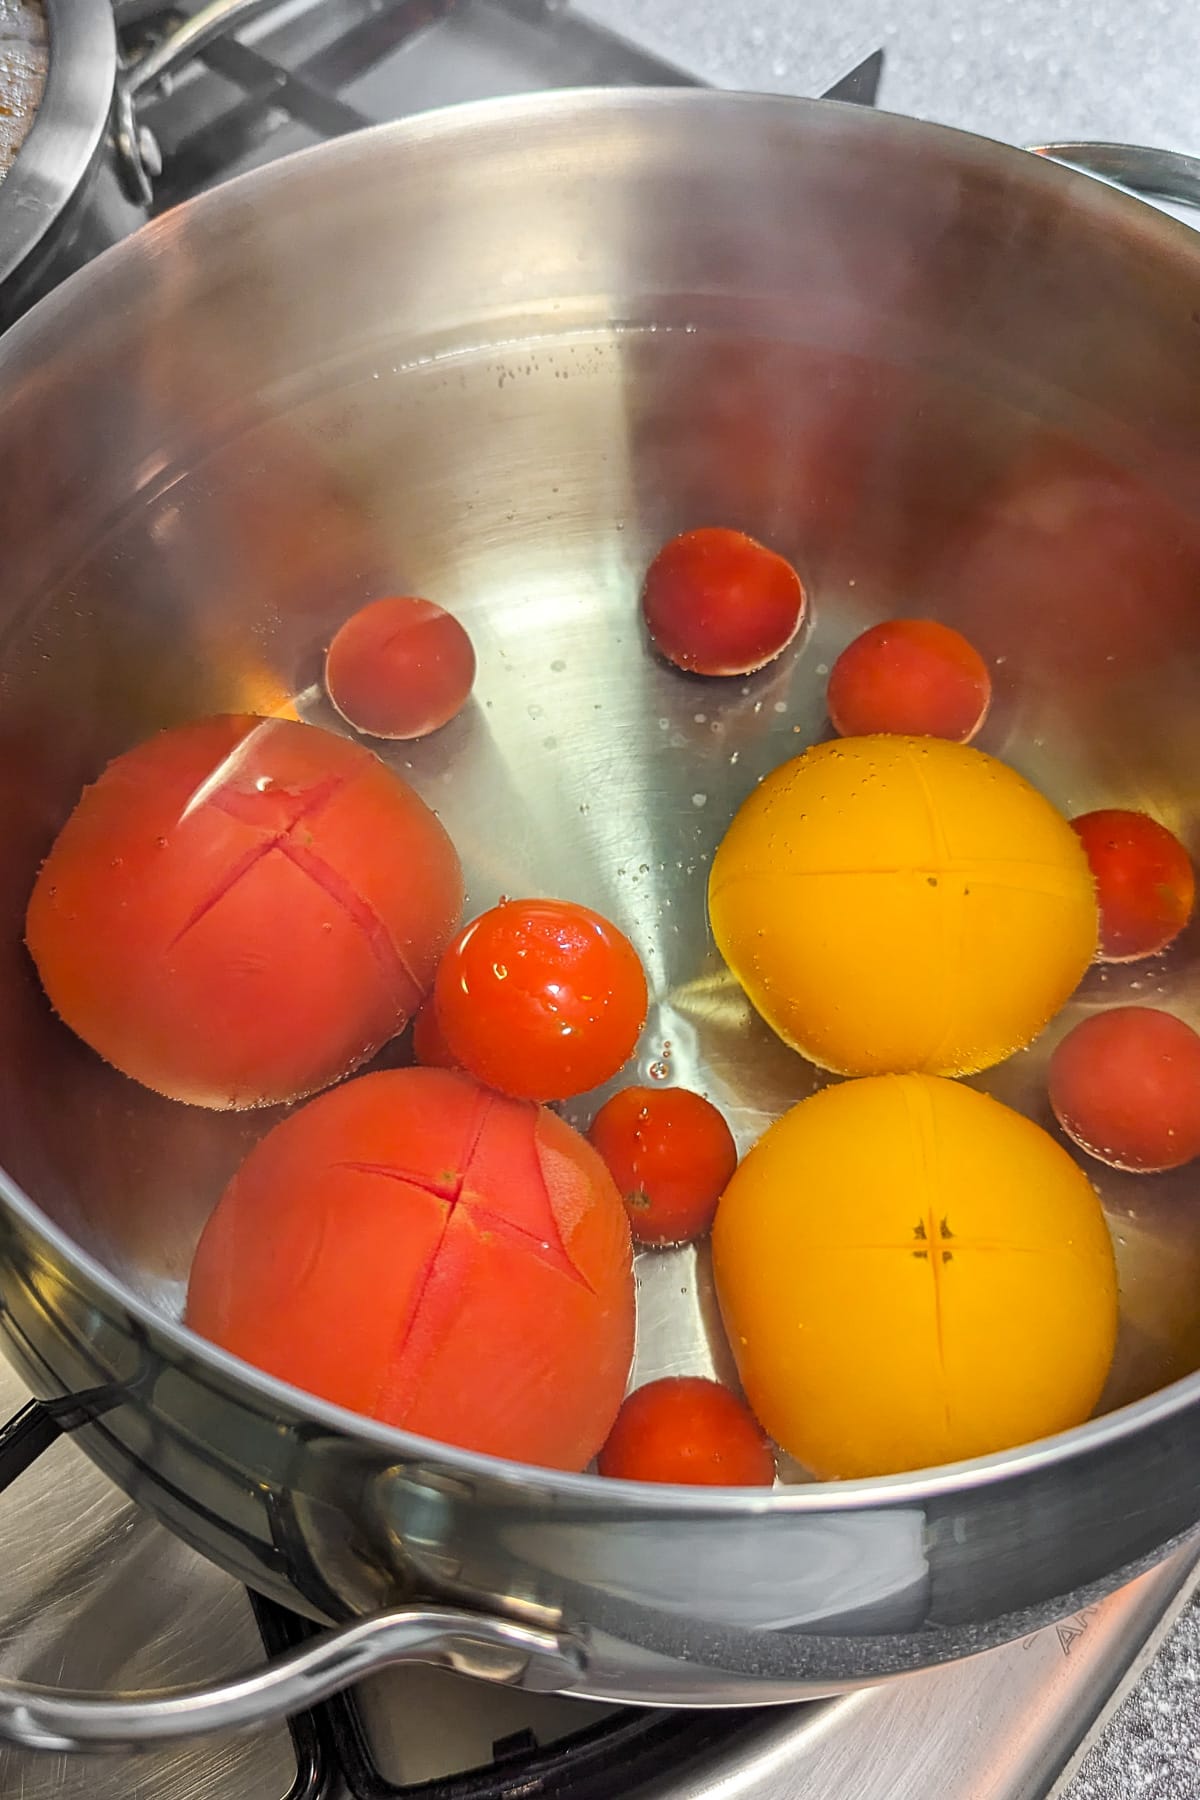 Boiling the tomatoes in a pan with hot water.